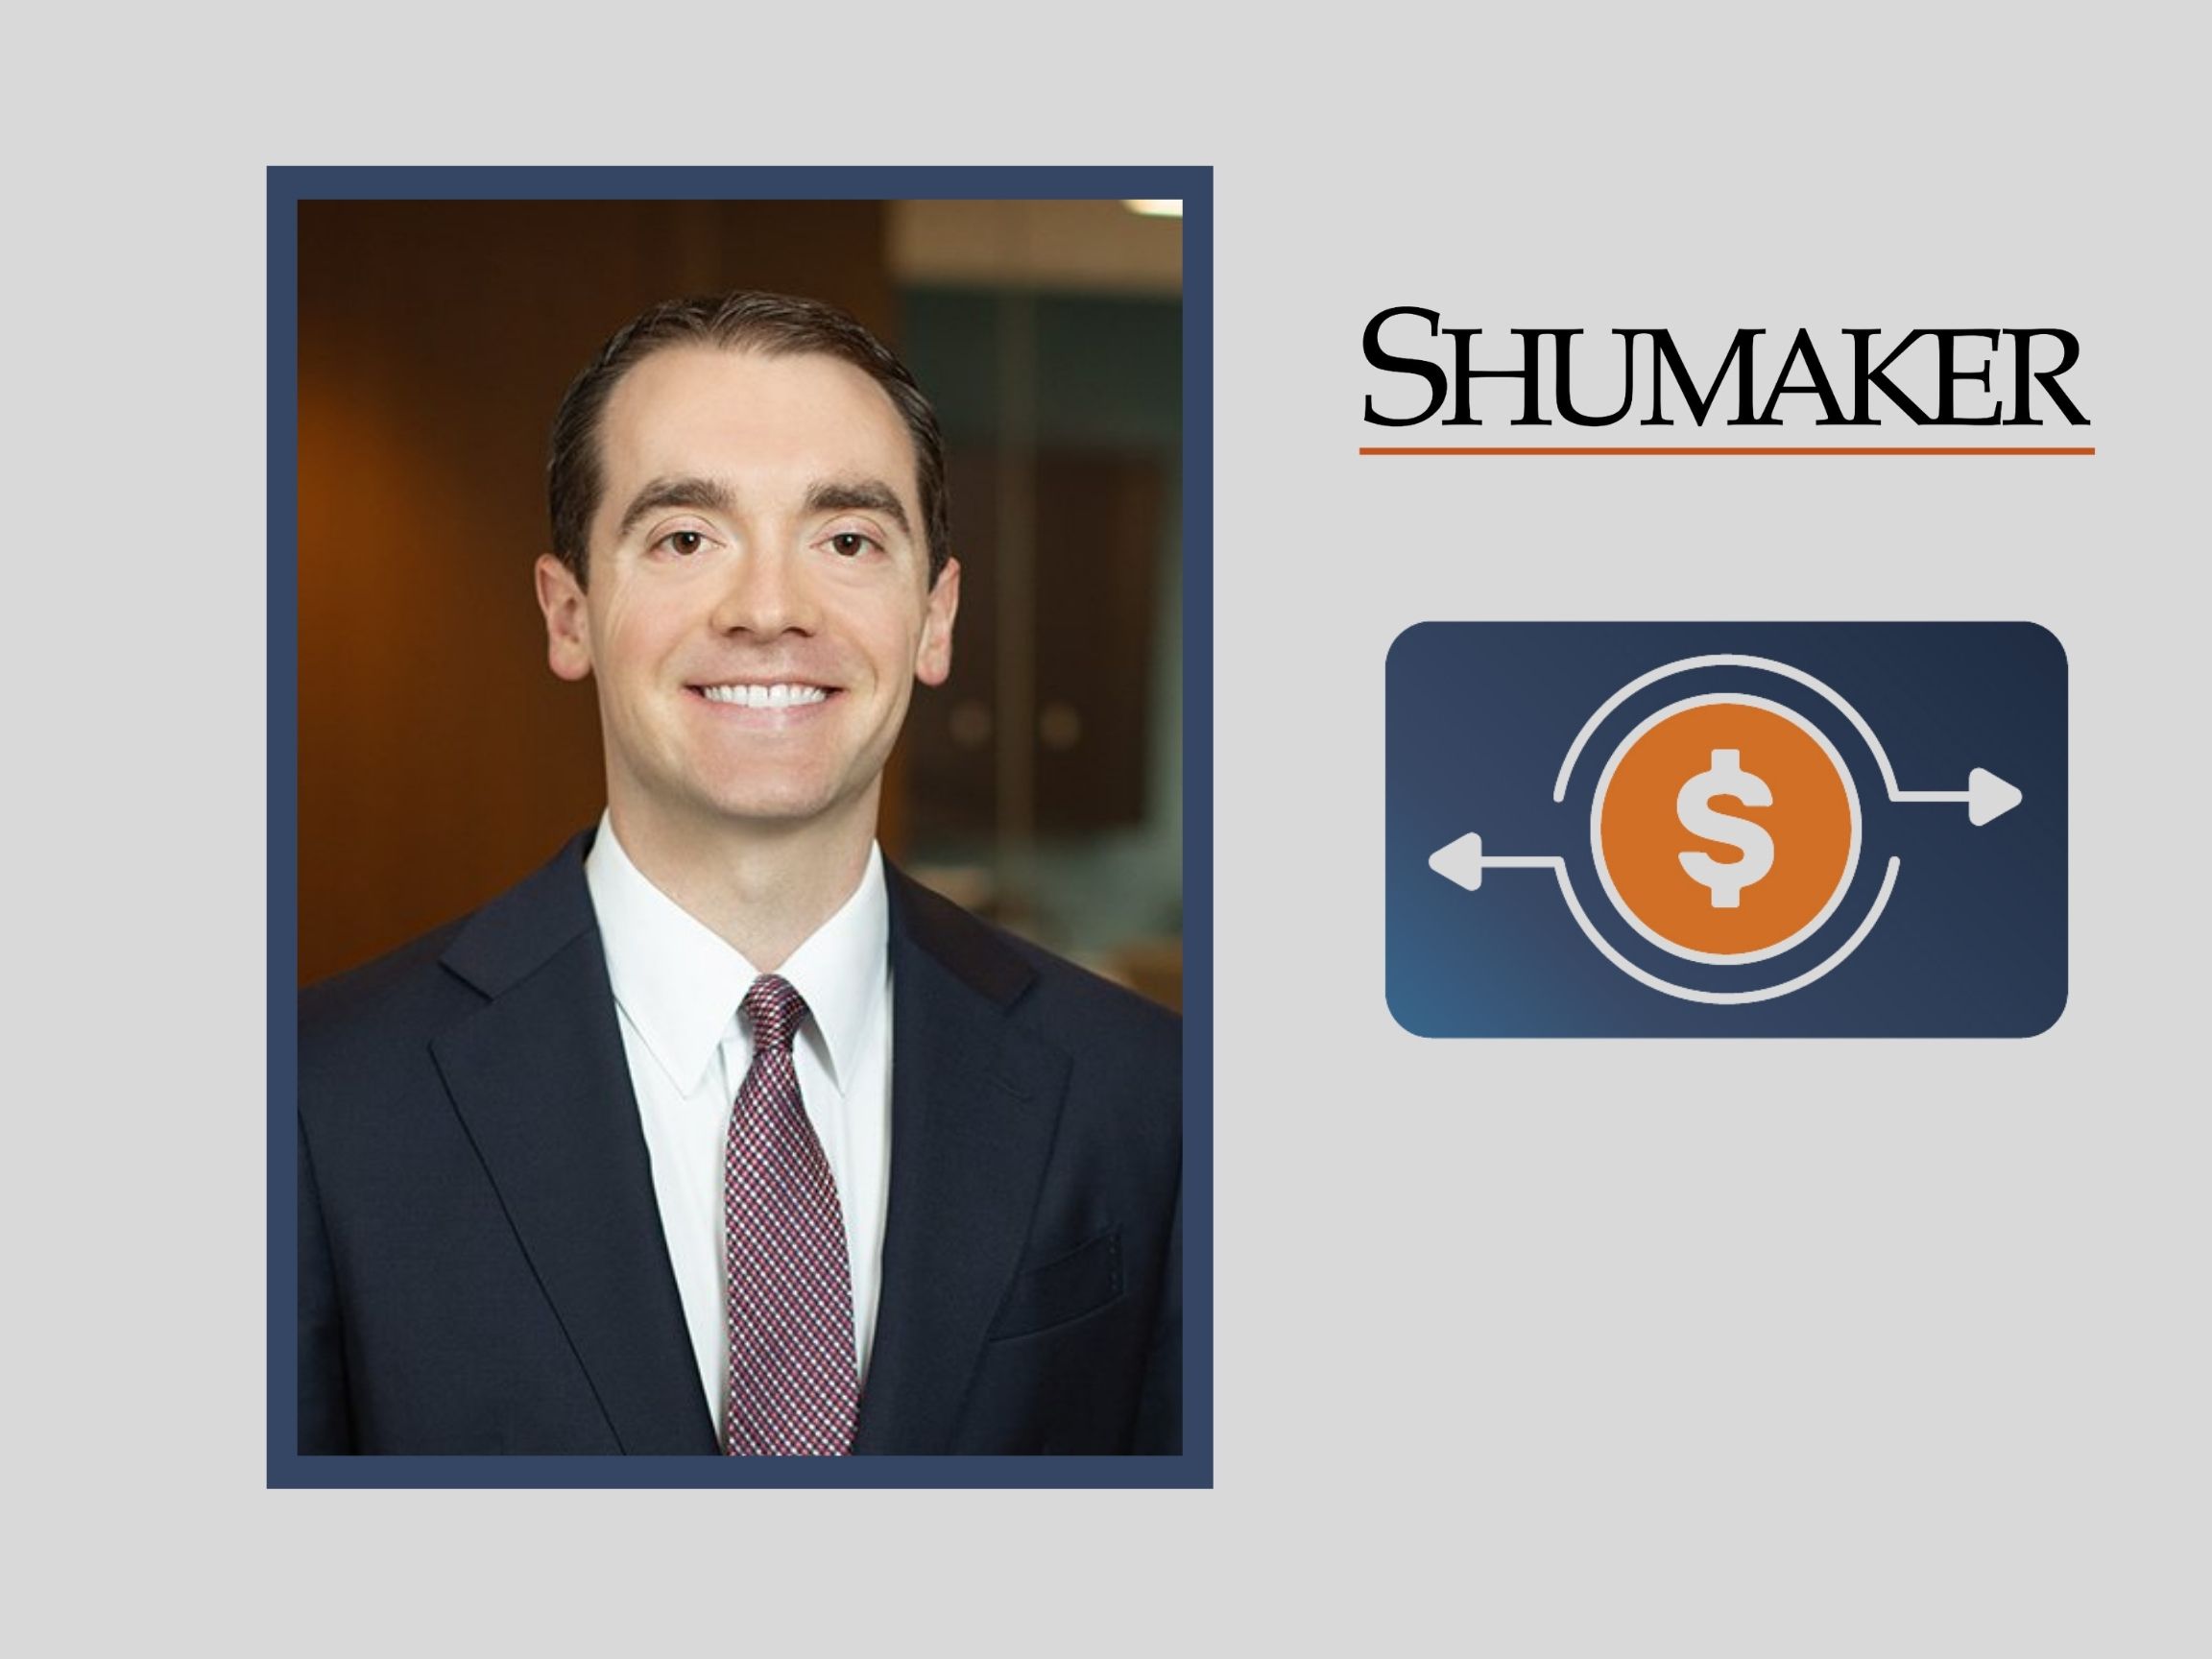 CPA and Former IRS Agent from Top 200 Public Accounting Firm Joins Shumaker